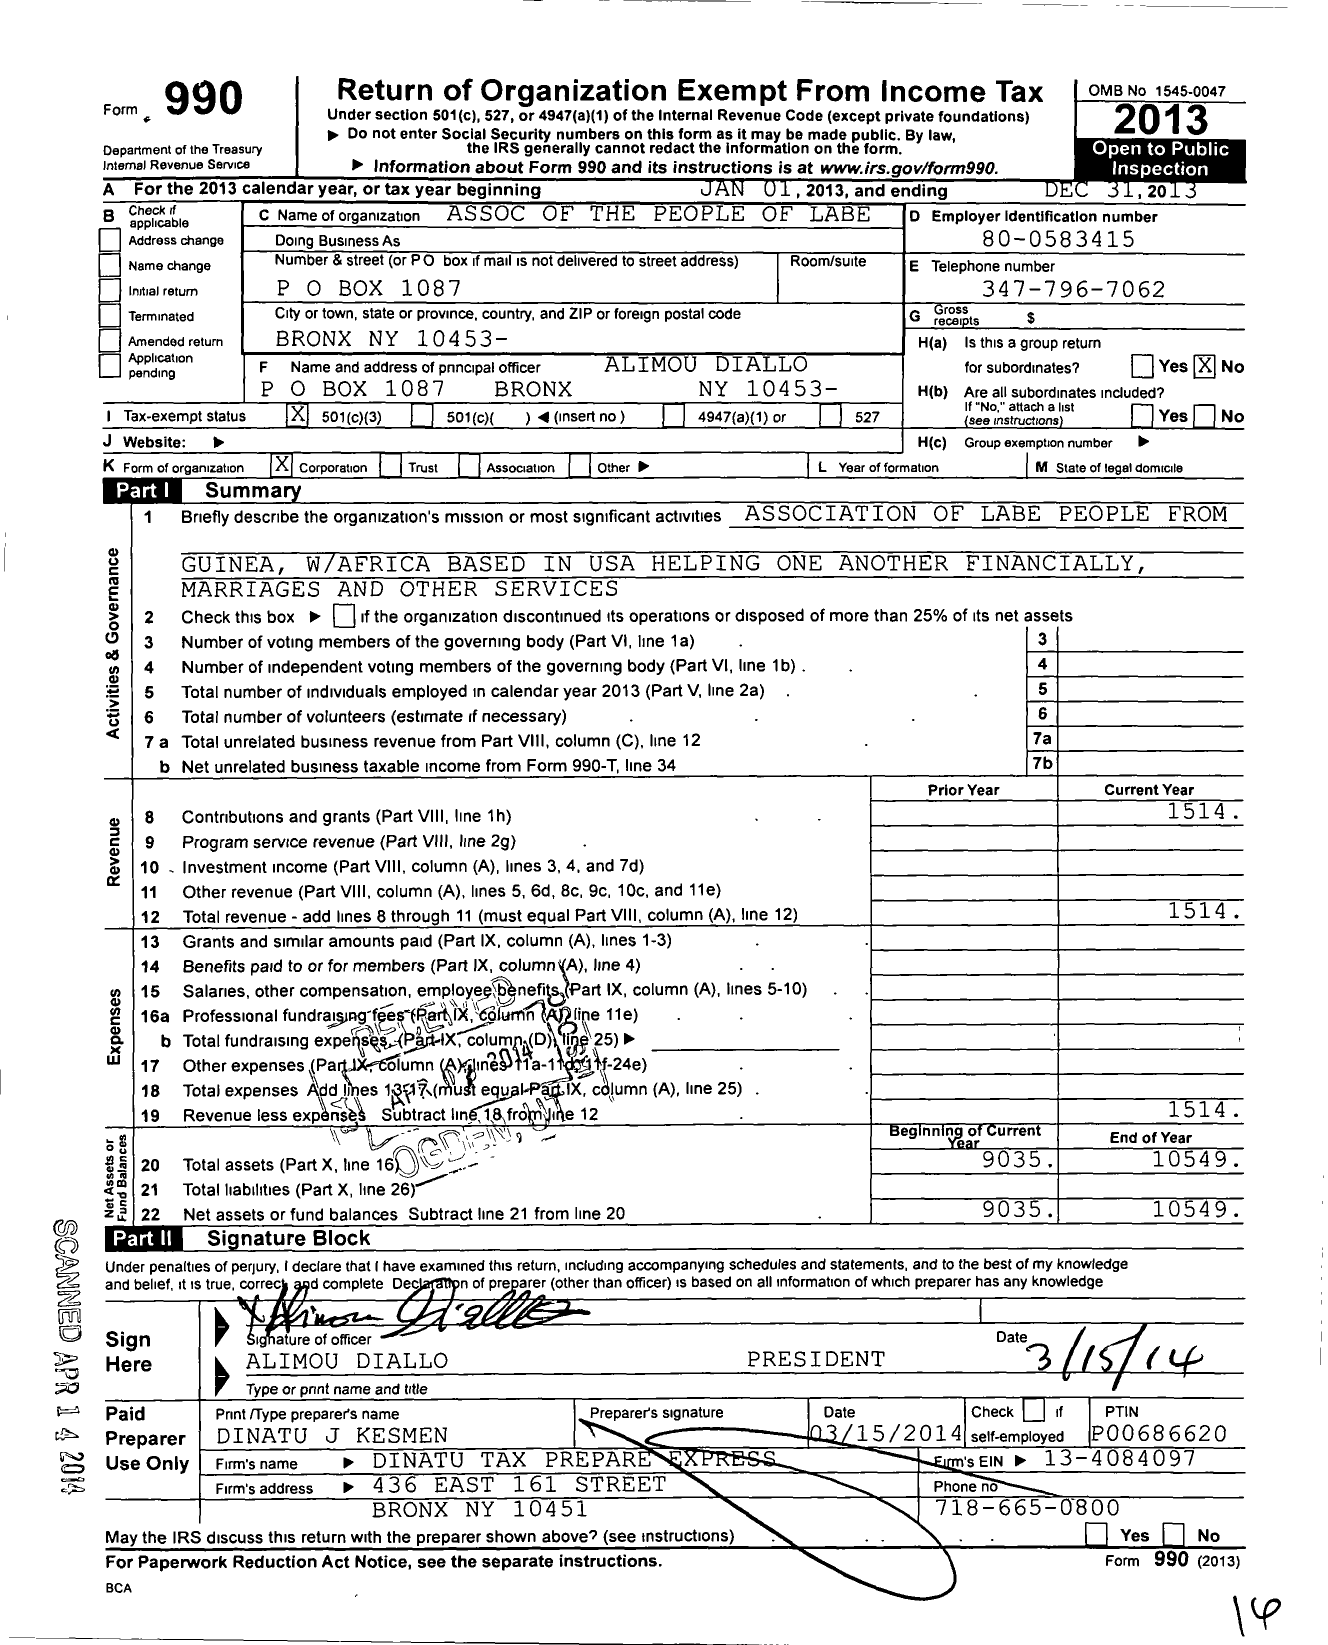 Image of first page of 2013 Form 990 for Association of the People of Labe USA